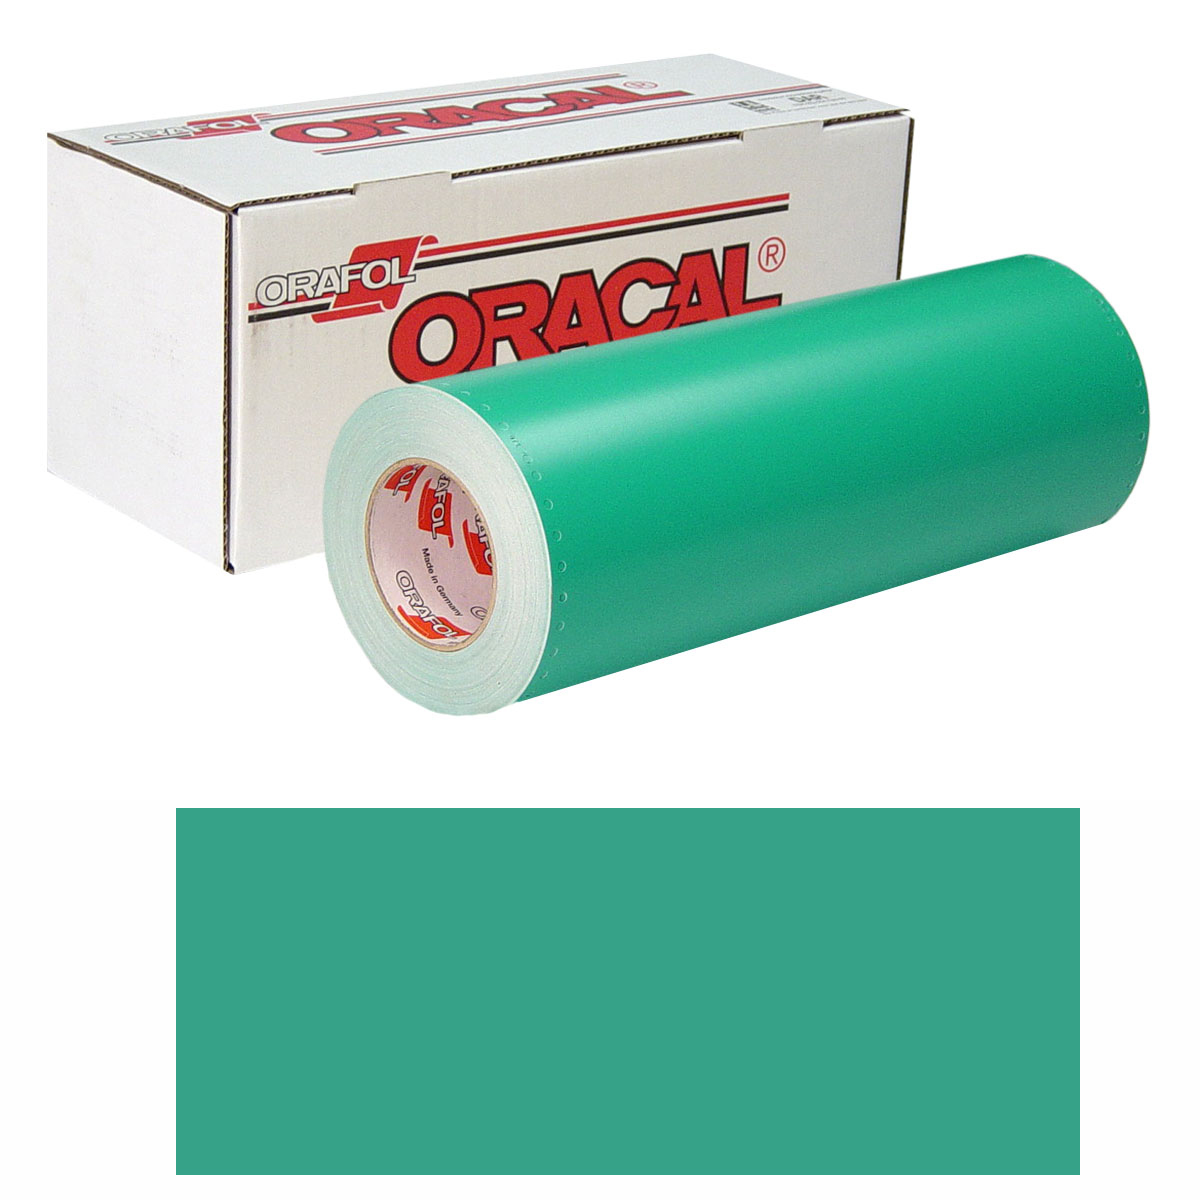 ORACAL 8500 Unp 48in X 10yd 009 Middle Green